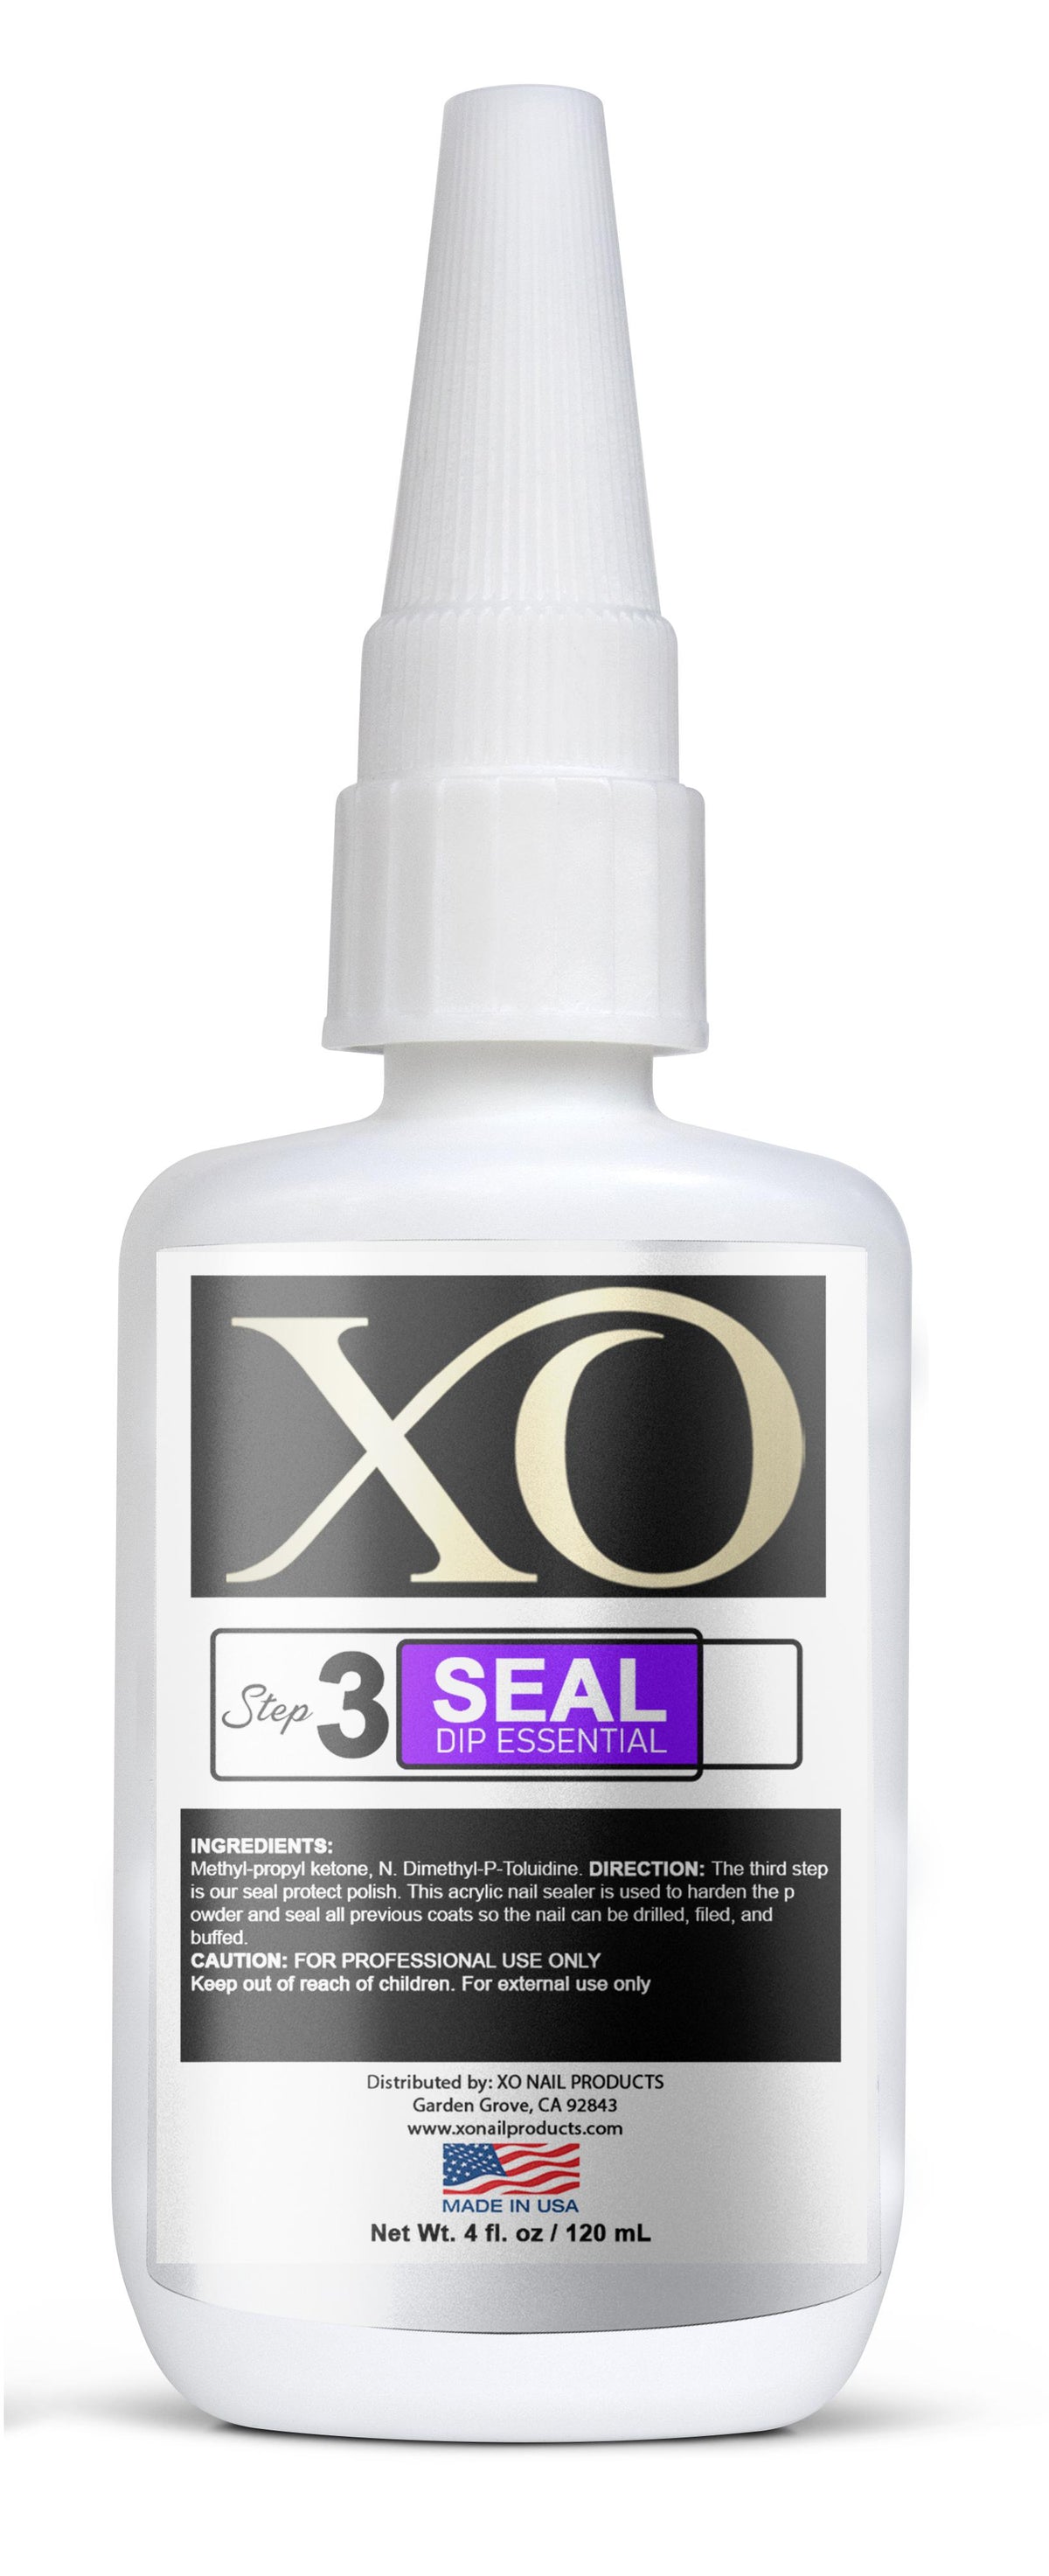 XO Dipping Essential - Seal Dip - Refill (4oz/120ml) for Dipping Manicures-XO- Nail Supply American Gel Polish - Phuong Ni